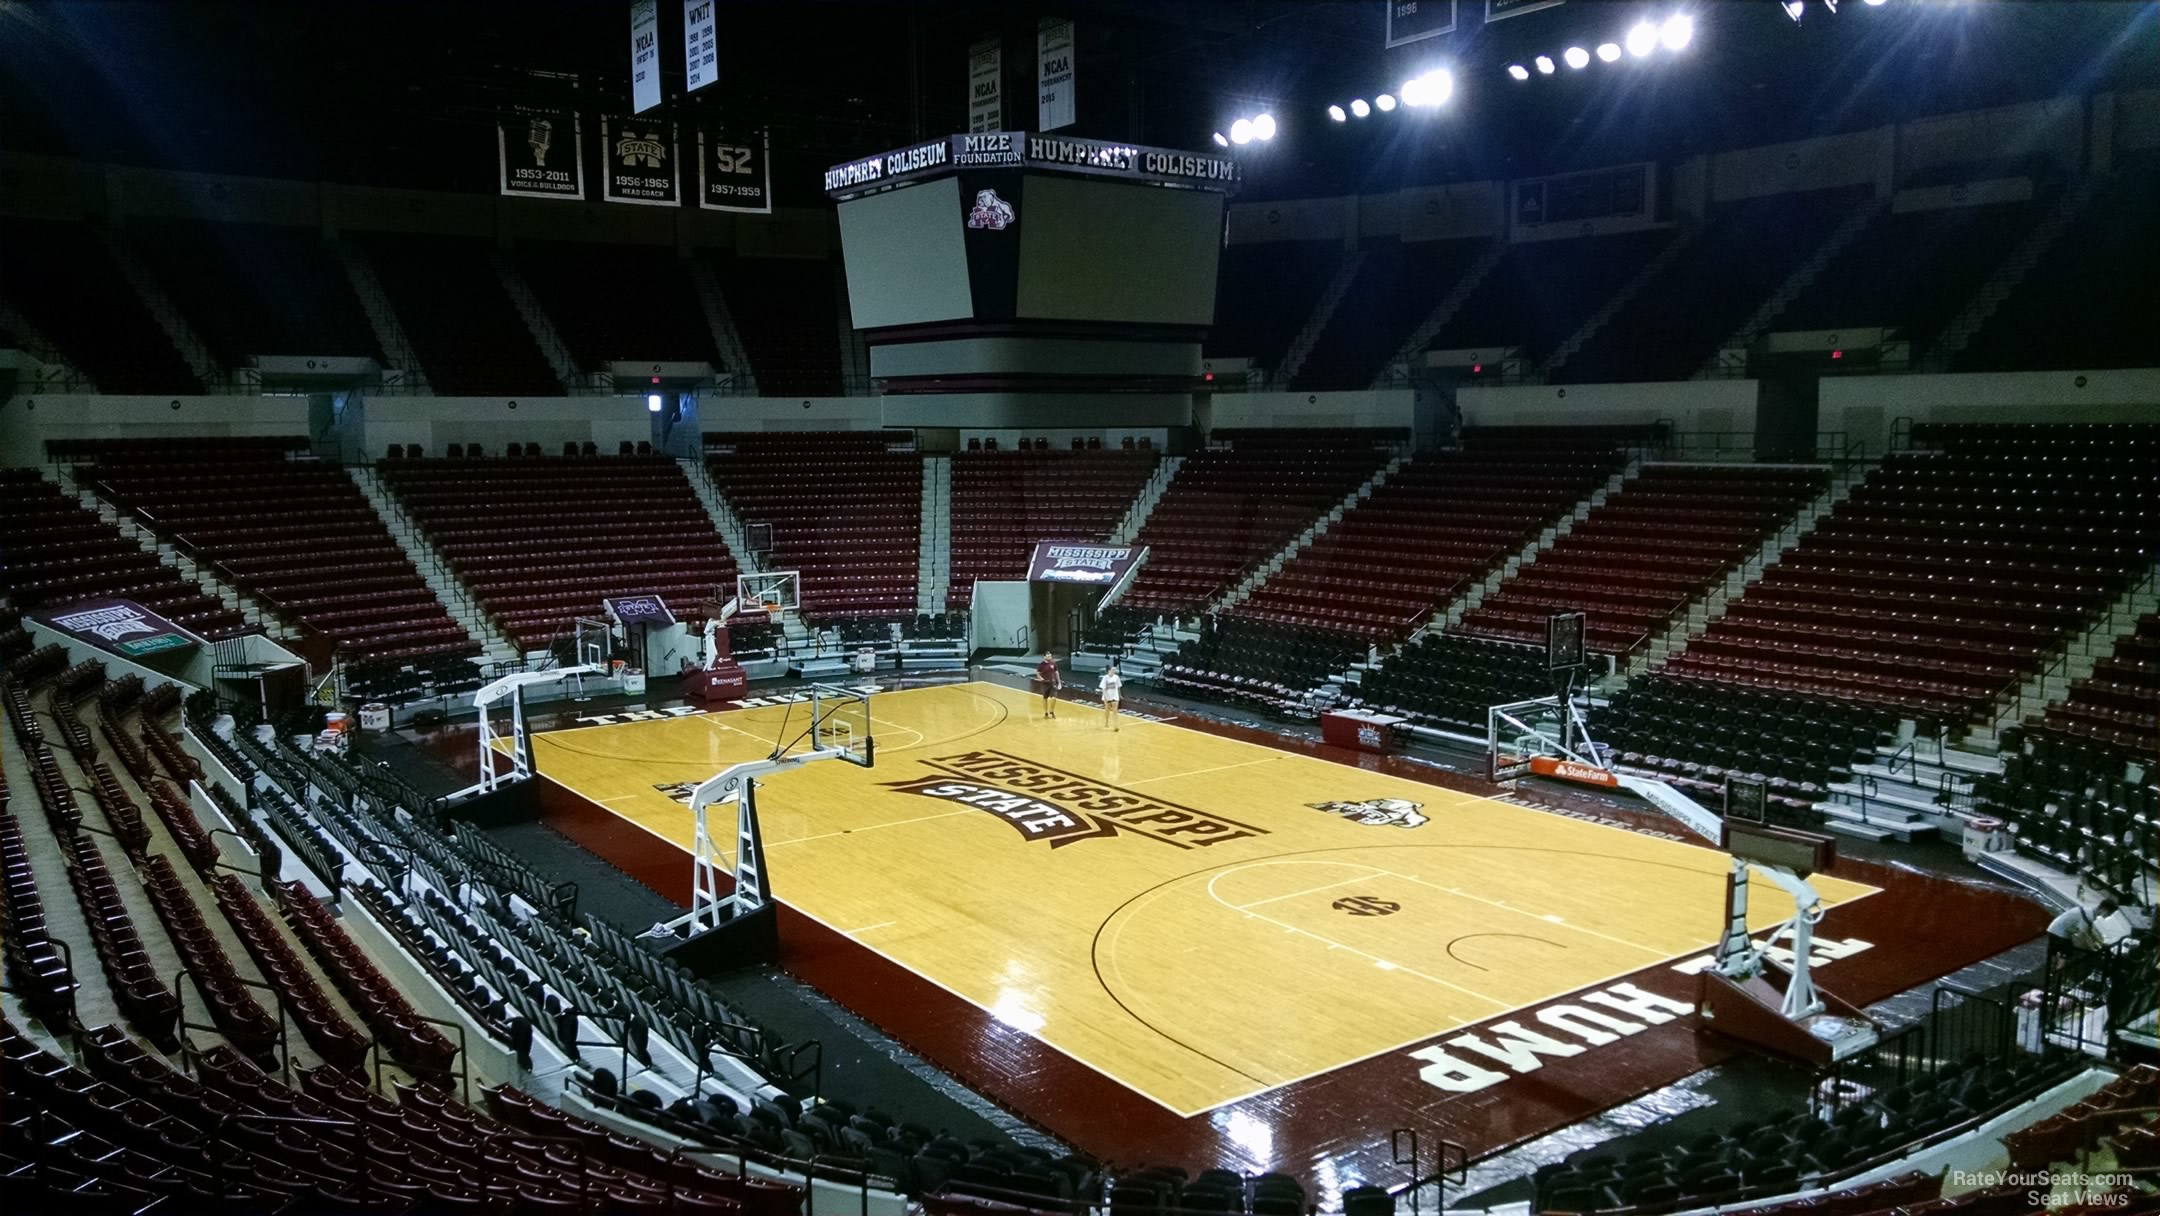 section 103, row 15 seat view  - humphrey coliseum